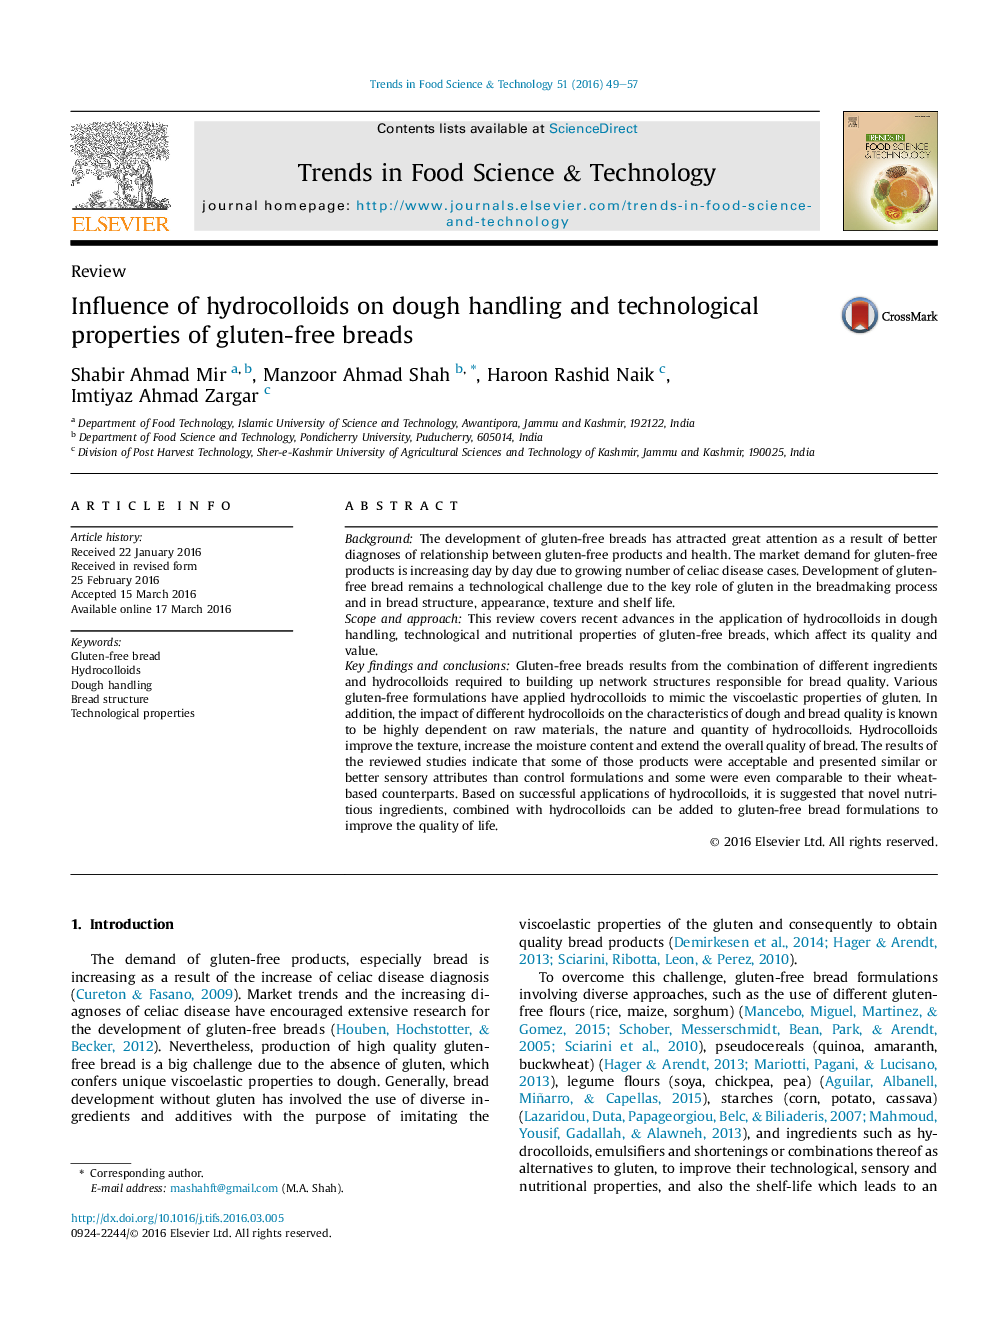 Influence of hydrocolloids on dough handling and technological properties of gluten-free breads